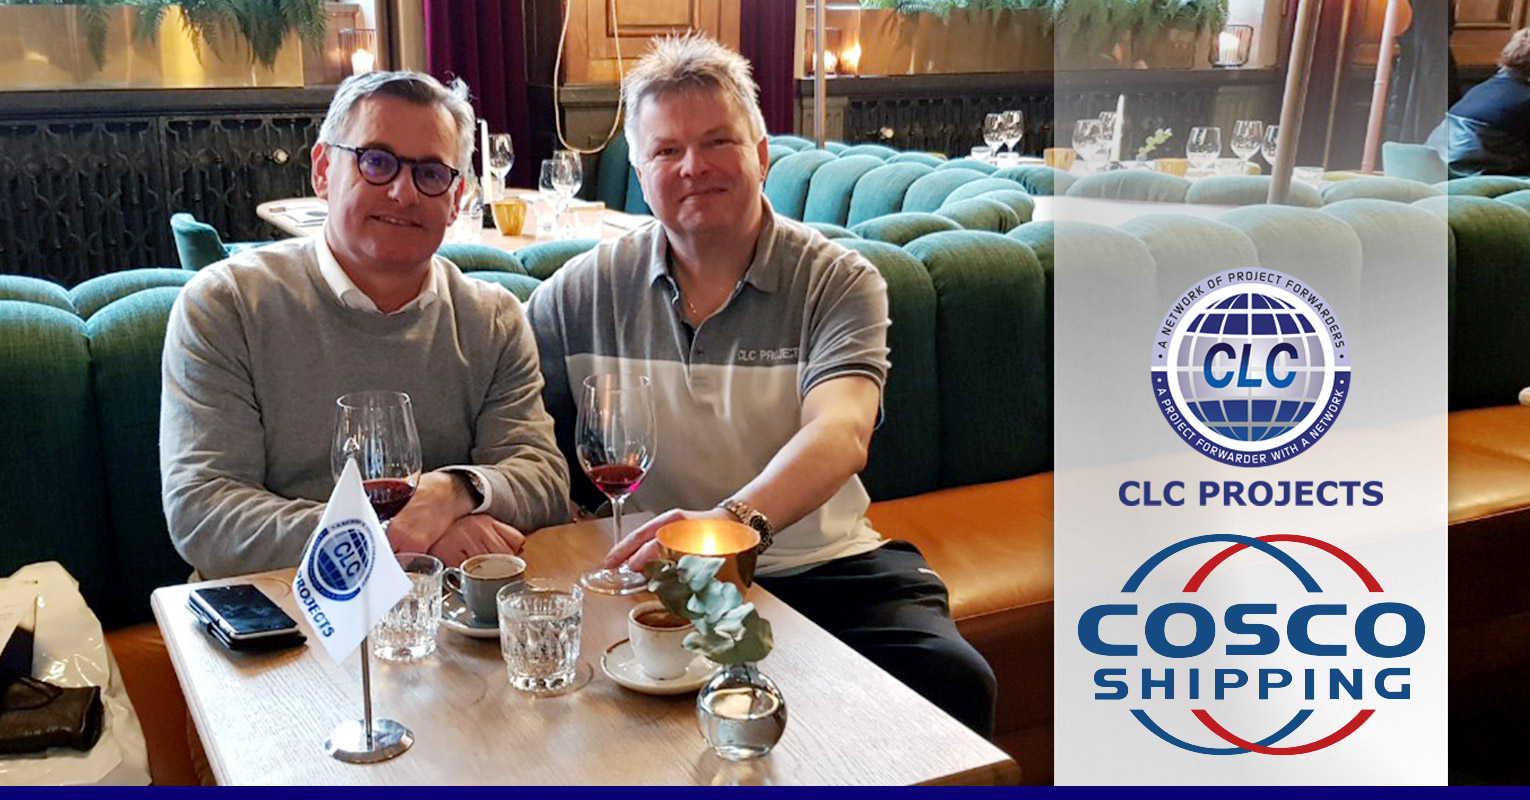 CLC Projects Network Chairman met with COSCO in Gothenburg, Sweden.